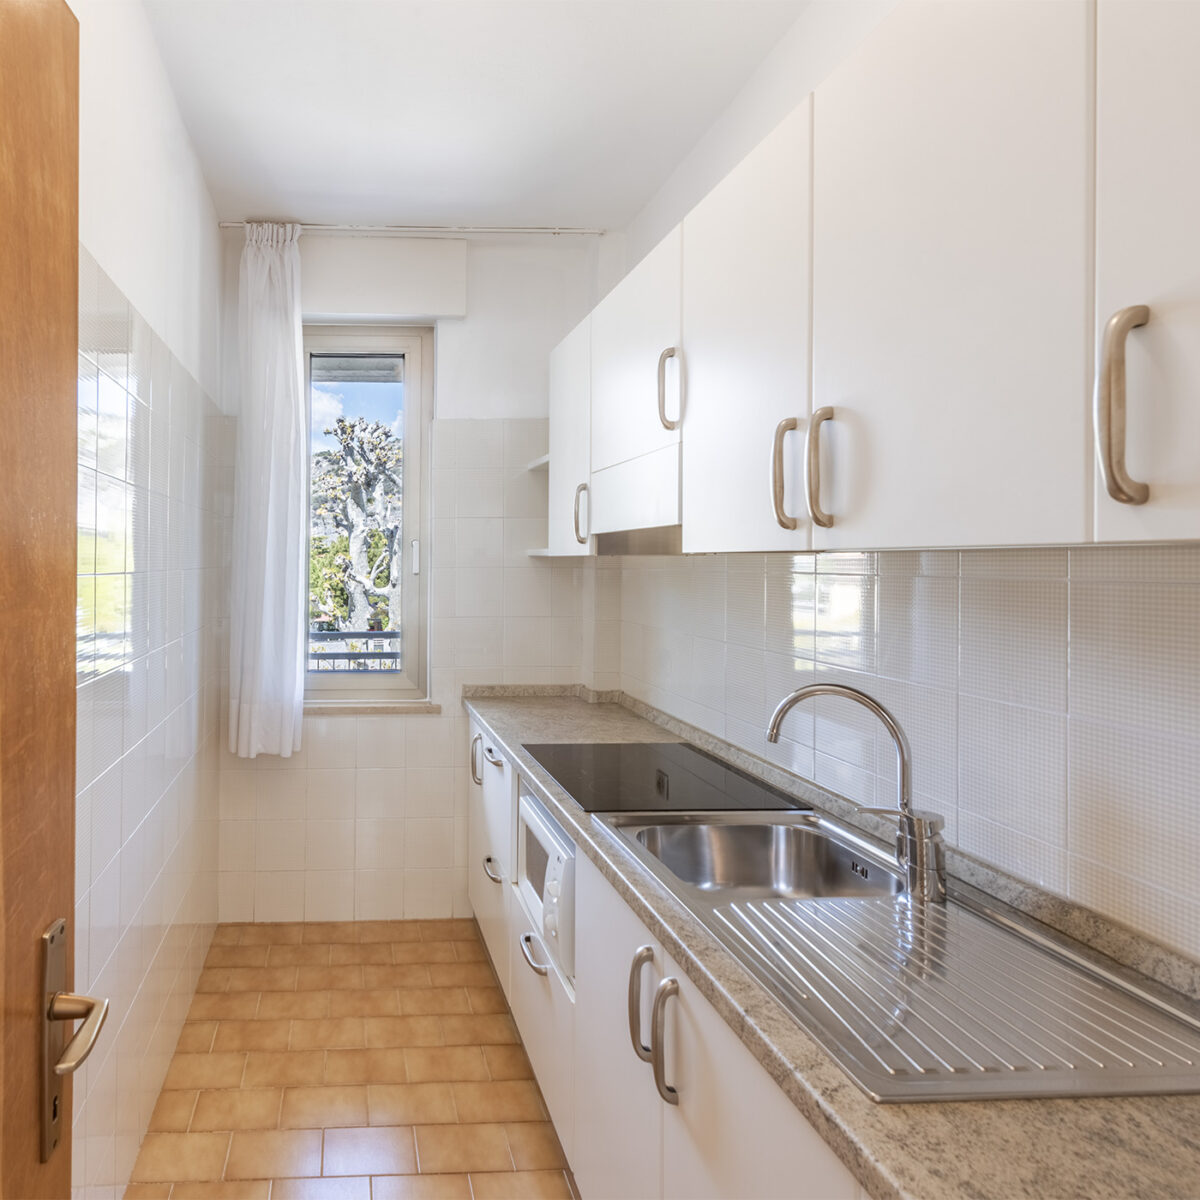 The separate kitchenette, is fully equipped for up to 5 persons